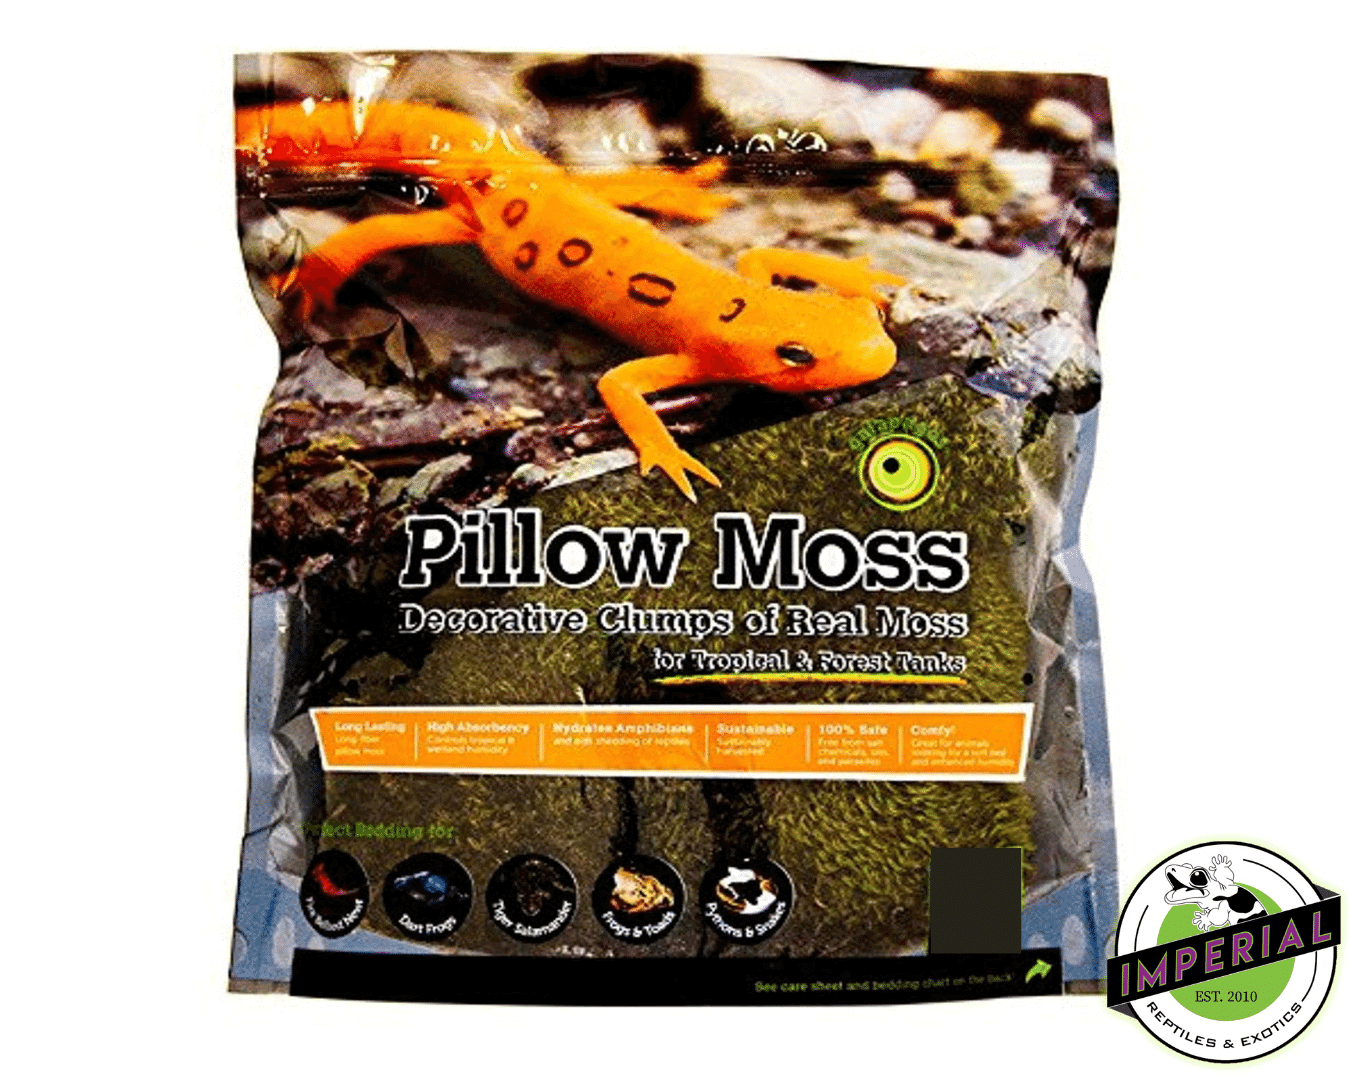 buy reptile substrate and moss for sale online, buy reptile supplies near me